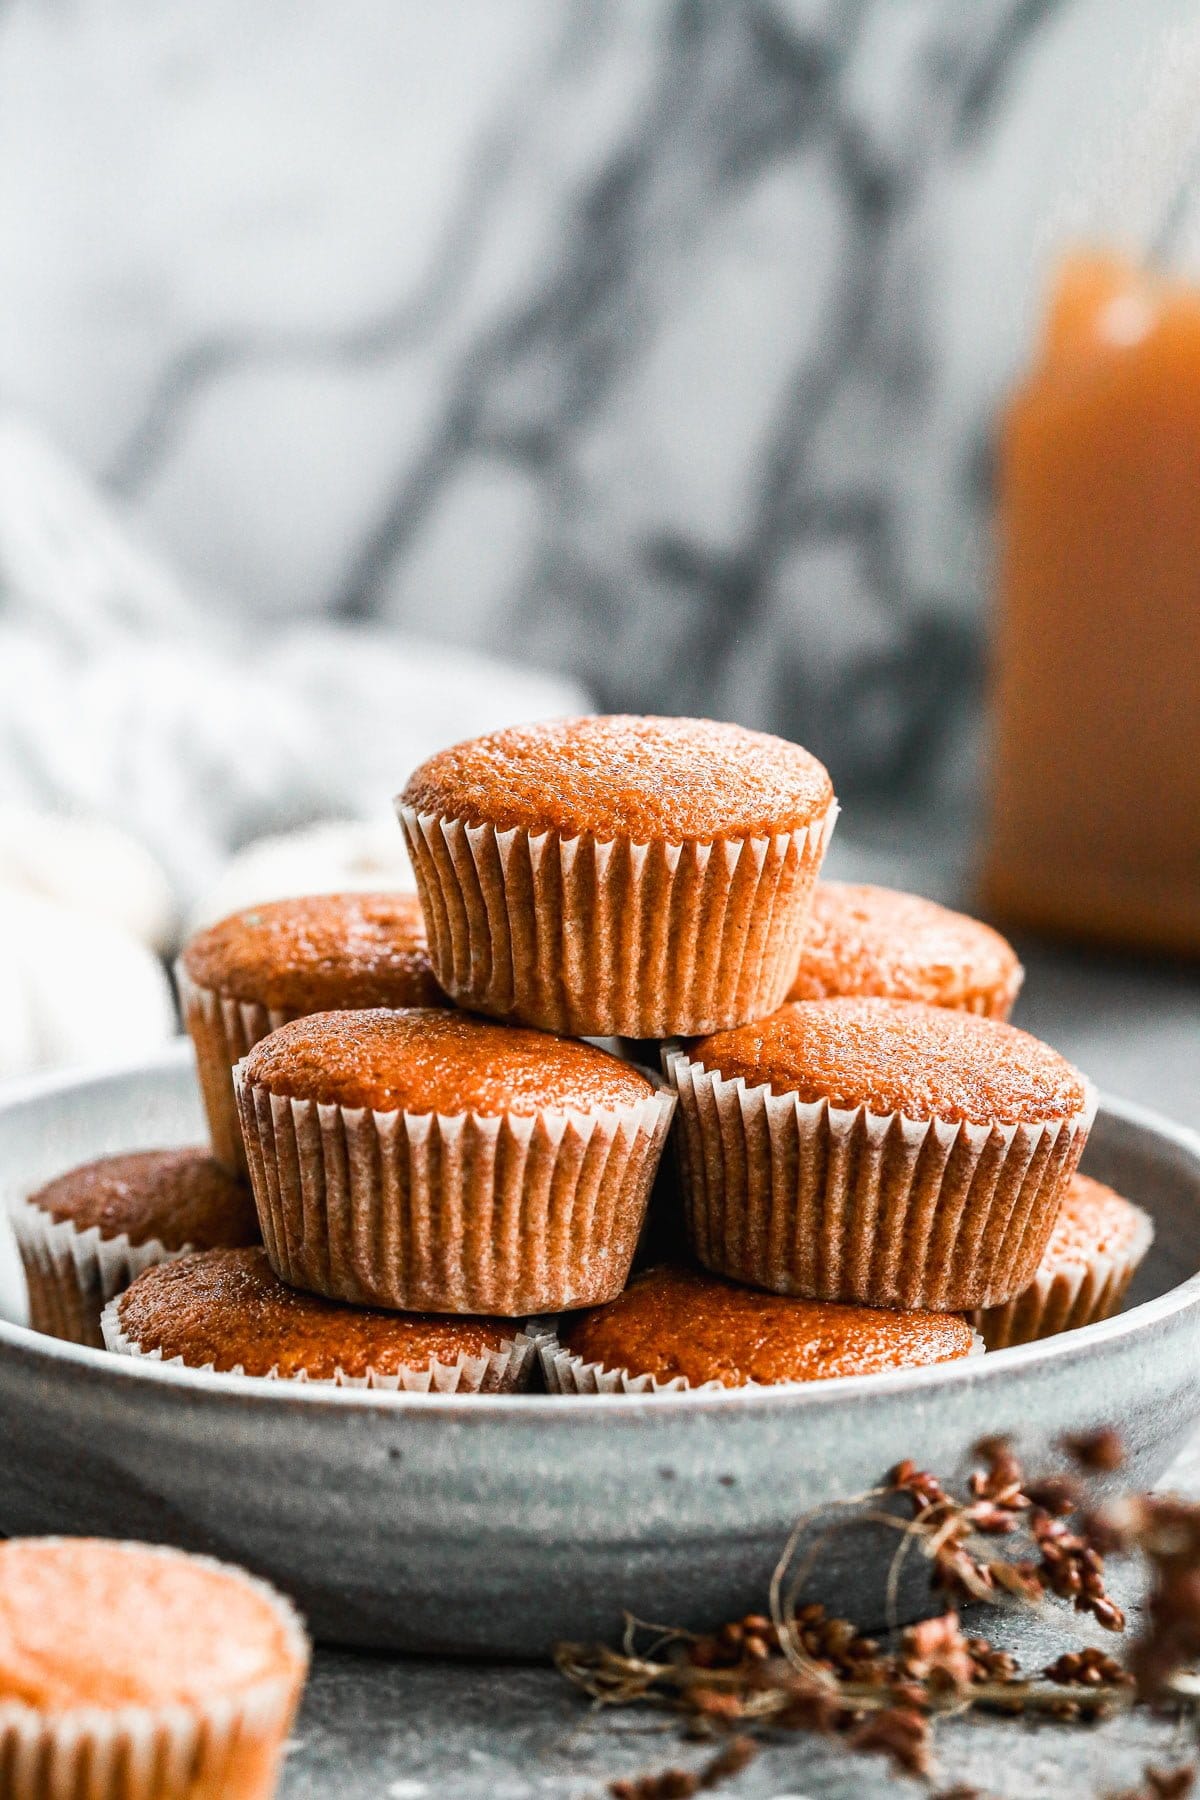 Our Easy Pumpkin Muffin Recipe is full of pumpkin flavor with notes of apple cider and the most tender, moist interior. Hands down the best pumpkin muffin recipe you'll make this fall! We drizzle the tops with a two-ingredient apple cider glaze but these are just as scrumptious plain.&nbsp;